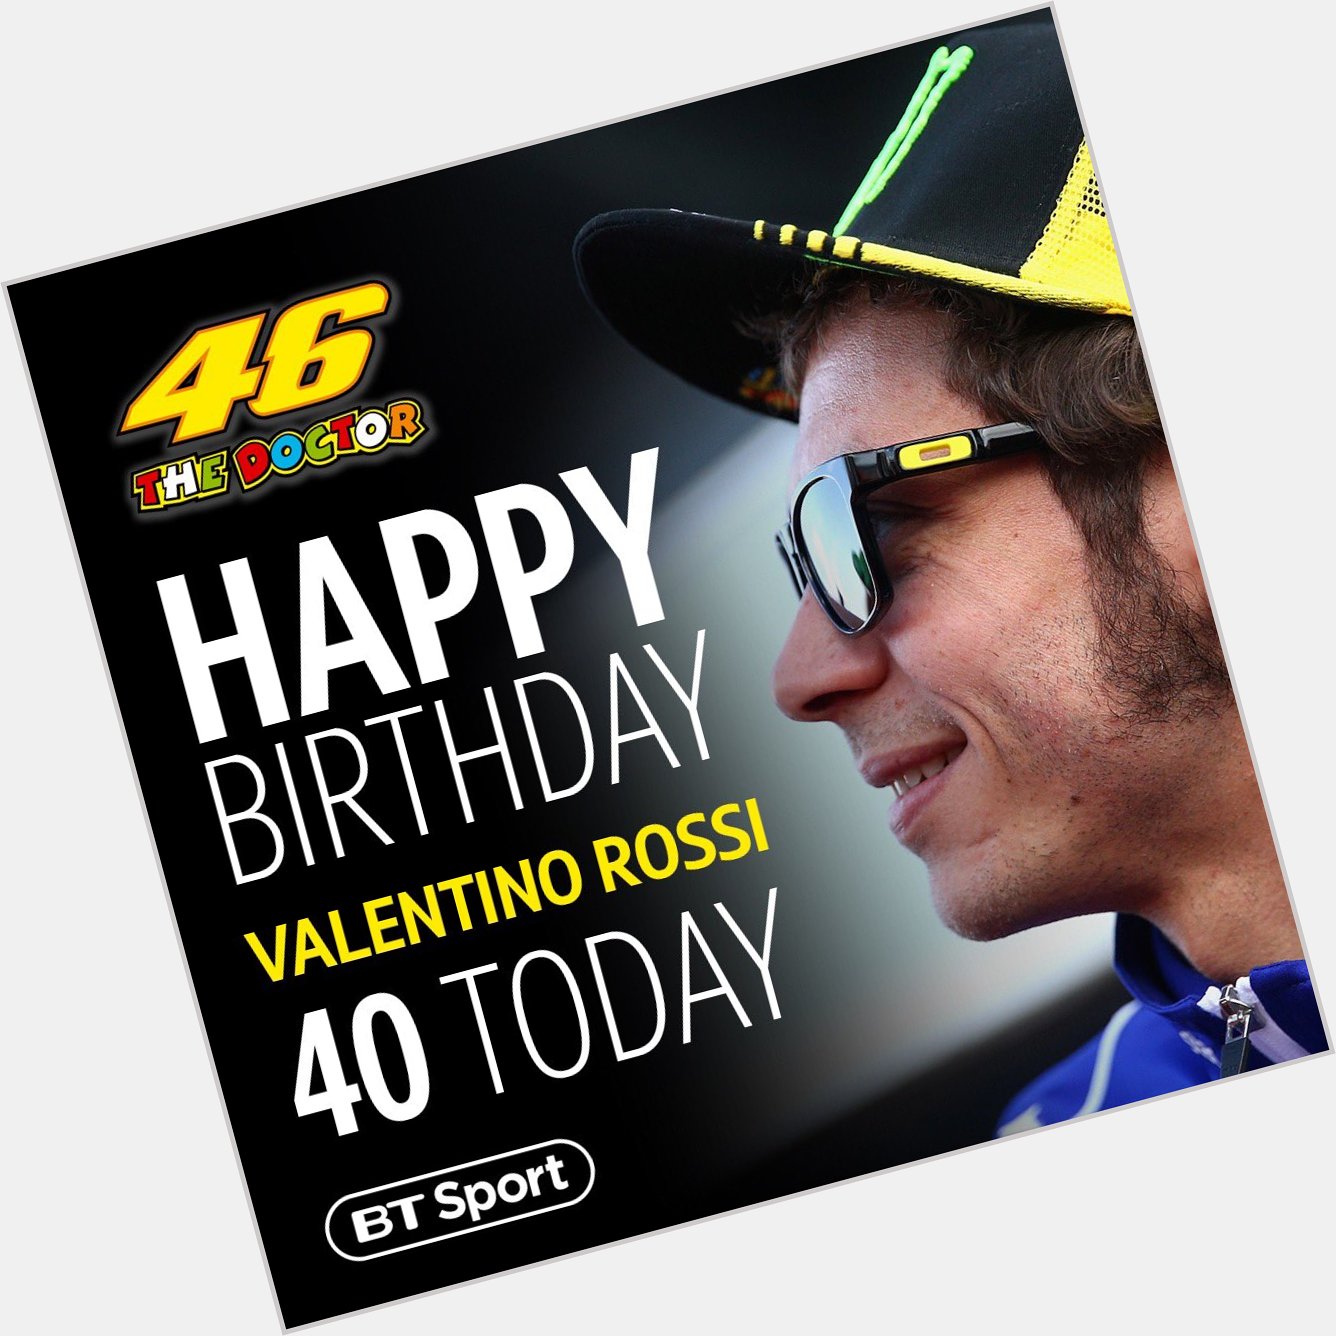 Happy birthday, Valentino Rossi!

40-years-old and still going strong A true sporting legend  